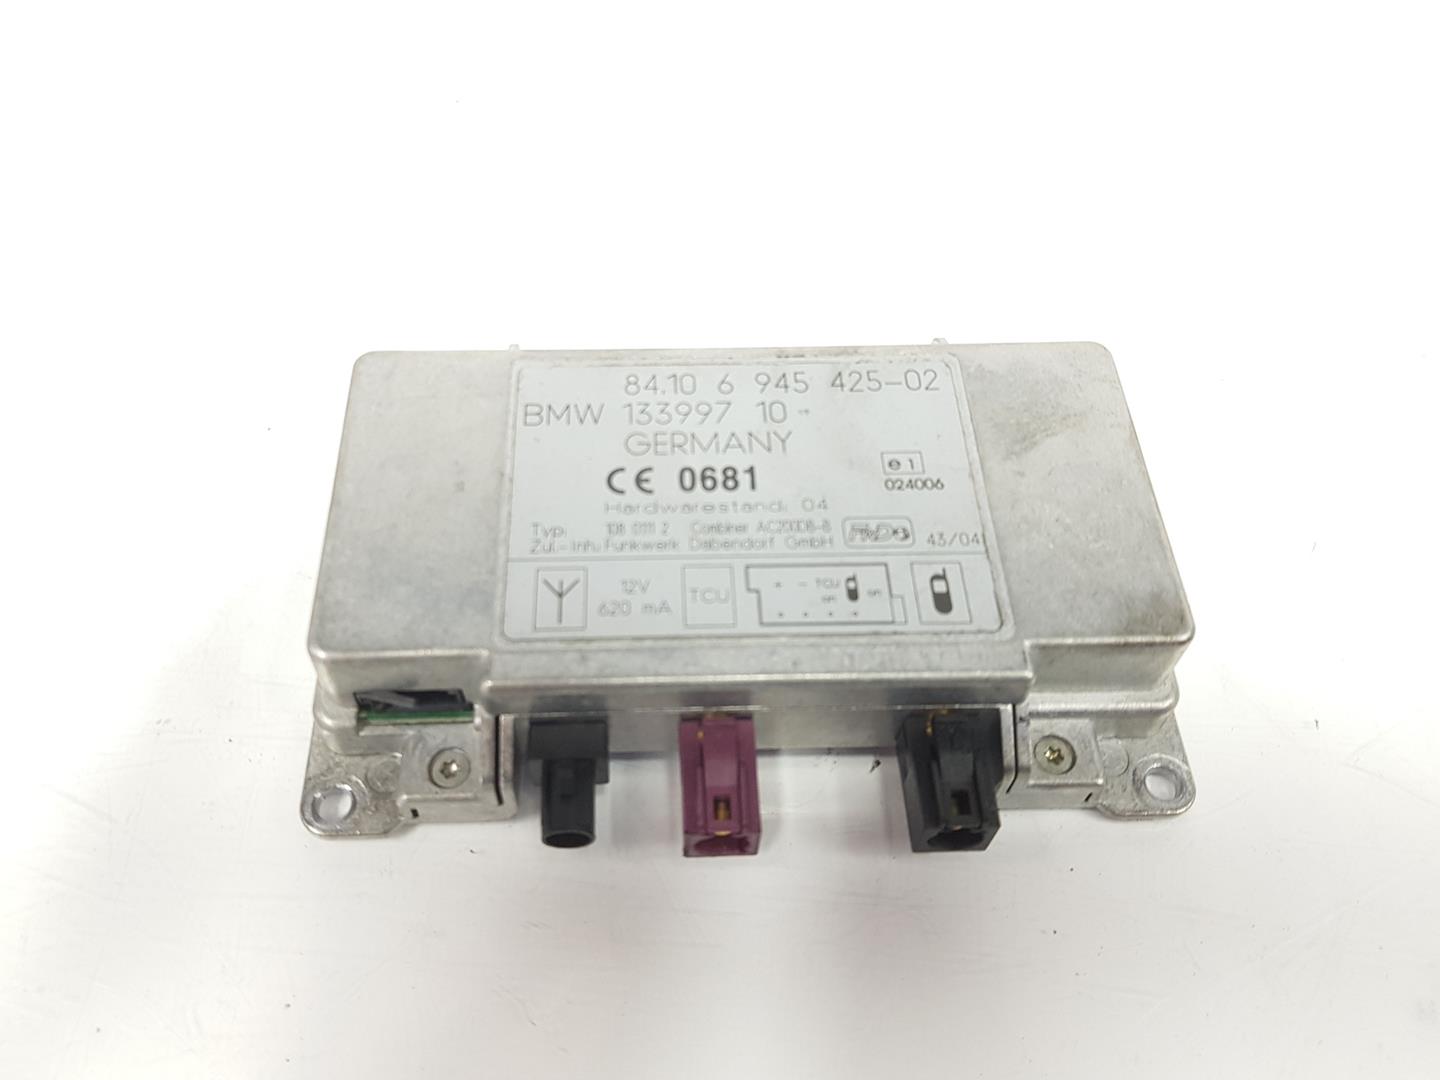 BMW X5 E53 (1999-2006) Other Control Units 6945425, 84106945425 19804880